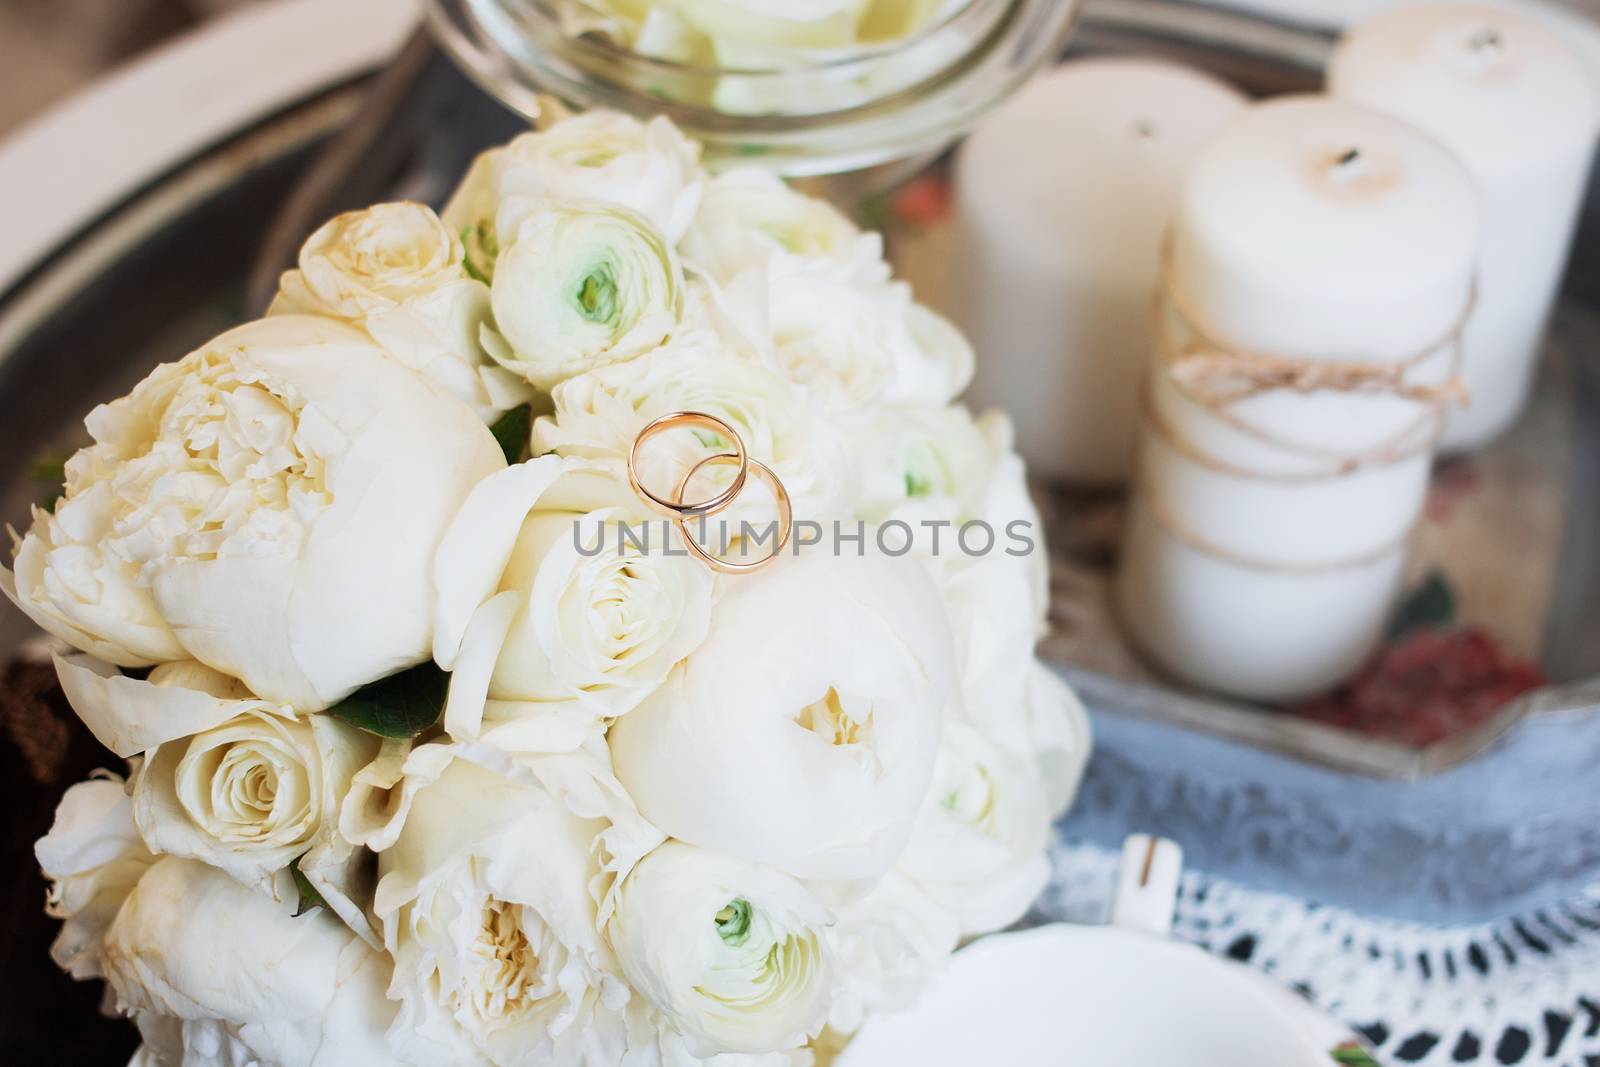 Beautiful wedding bouquet and rings. Wedding day.